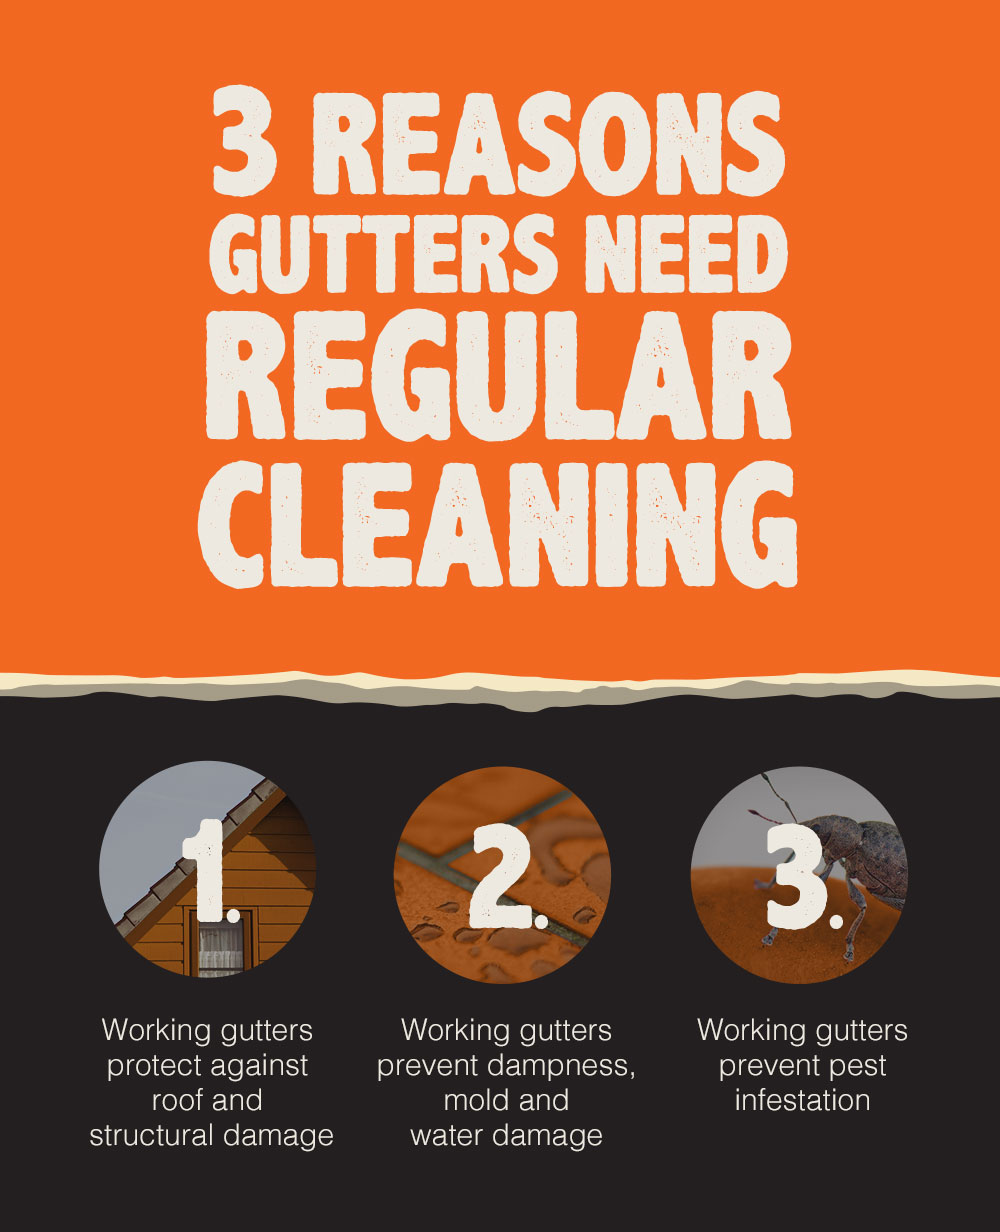 An infographic that states “3 reasons gutters need regular cleaning. 1. Working gutters protect against roof and structural damage. 2. Working gutters prevent dampness, mold and water damage. 3. Working gutters prevent pest infestation.”